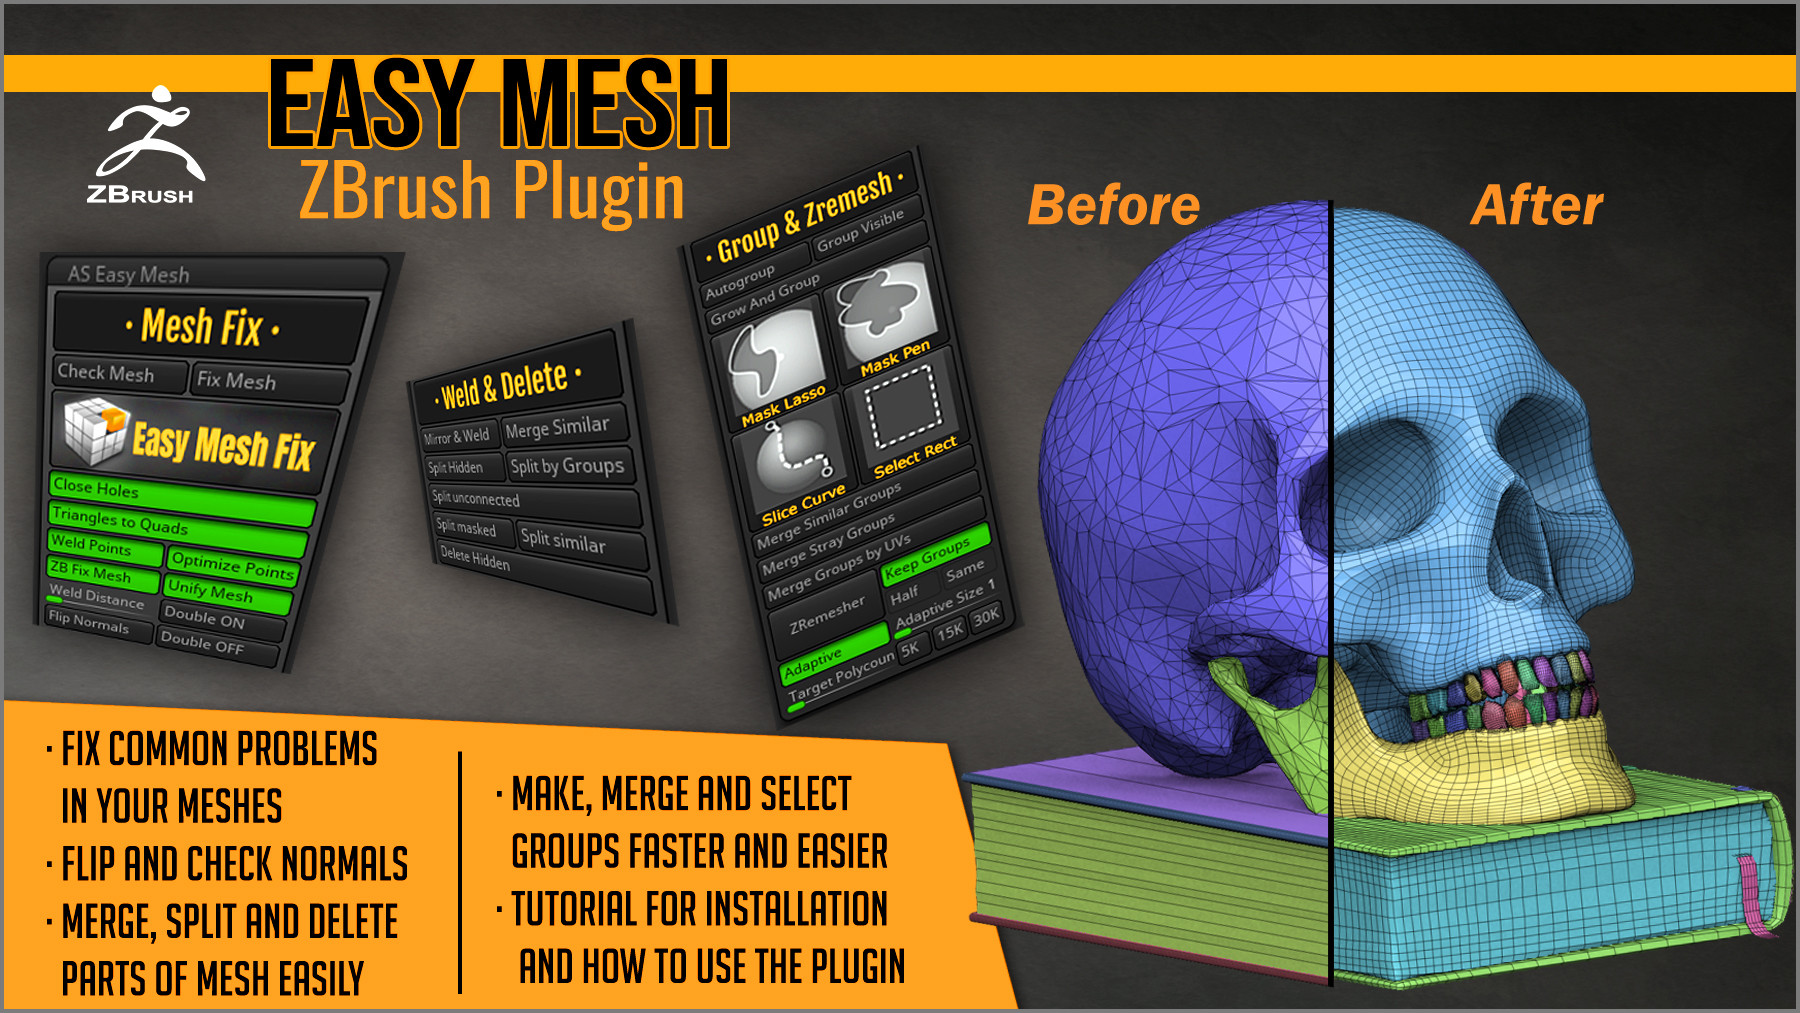 zbrush creating a mesh from a black and white image